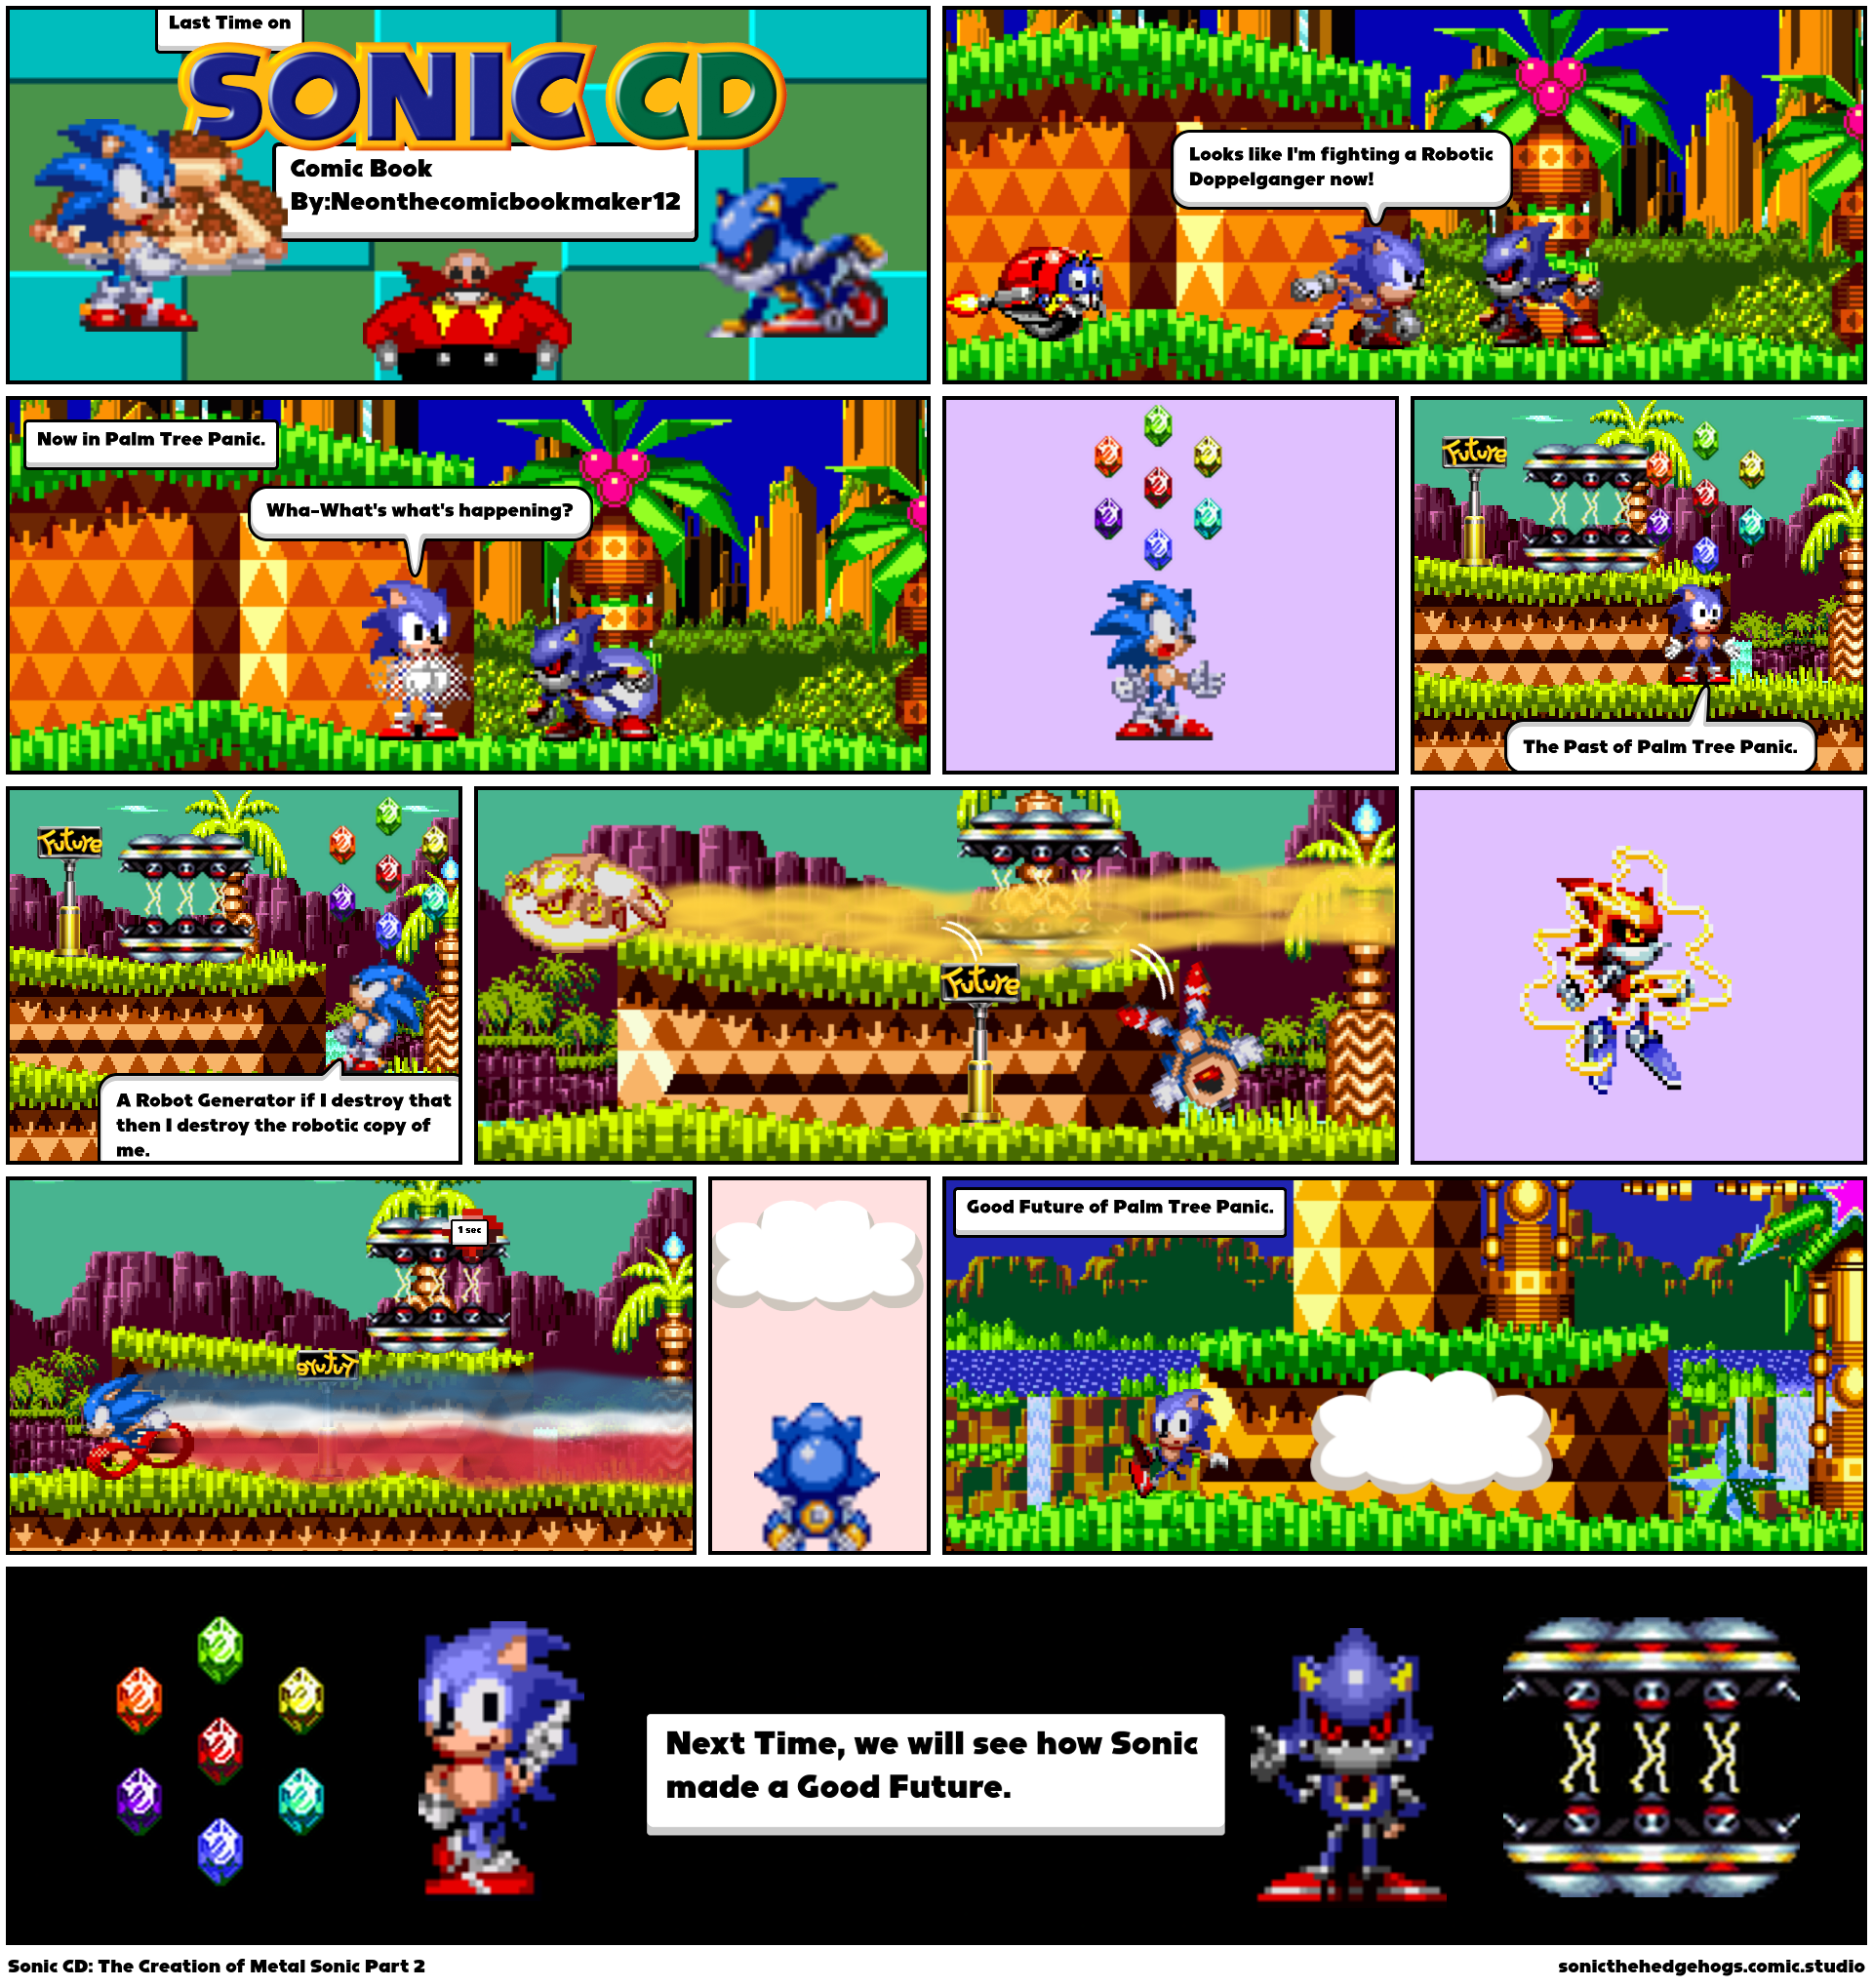 Sonic CD: The Creation of Metal Sonic Part 2